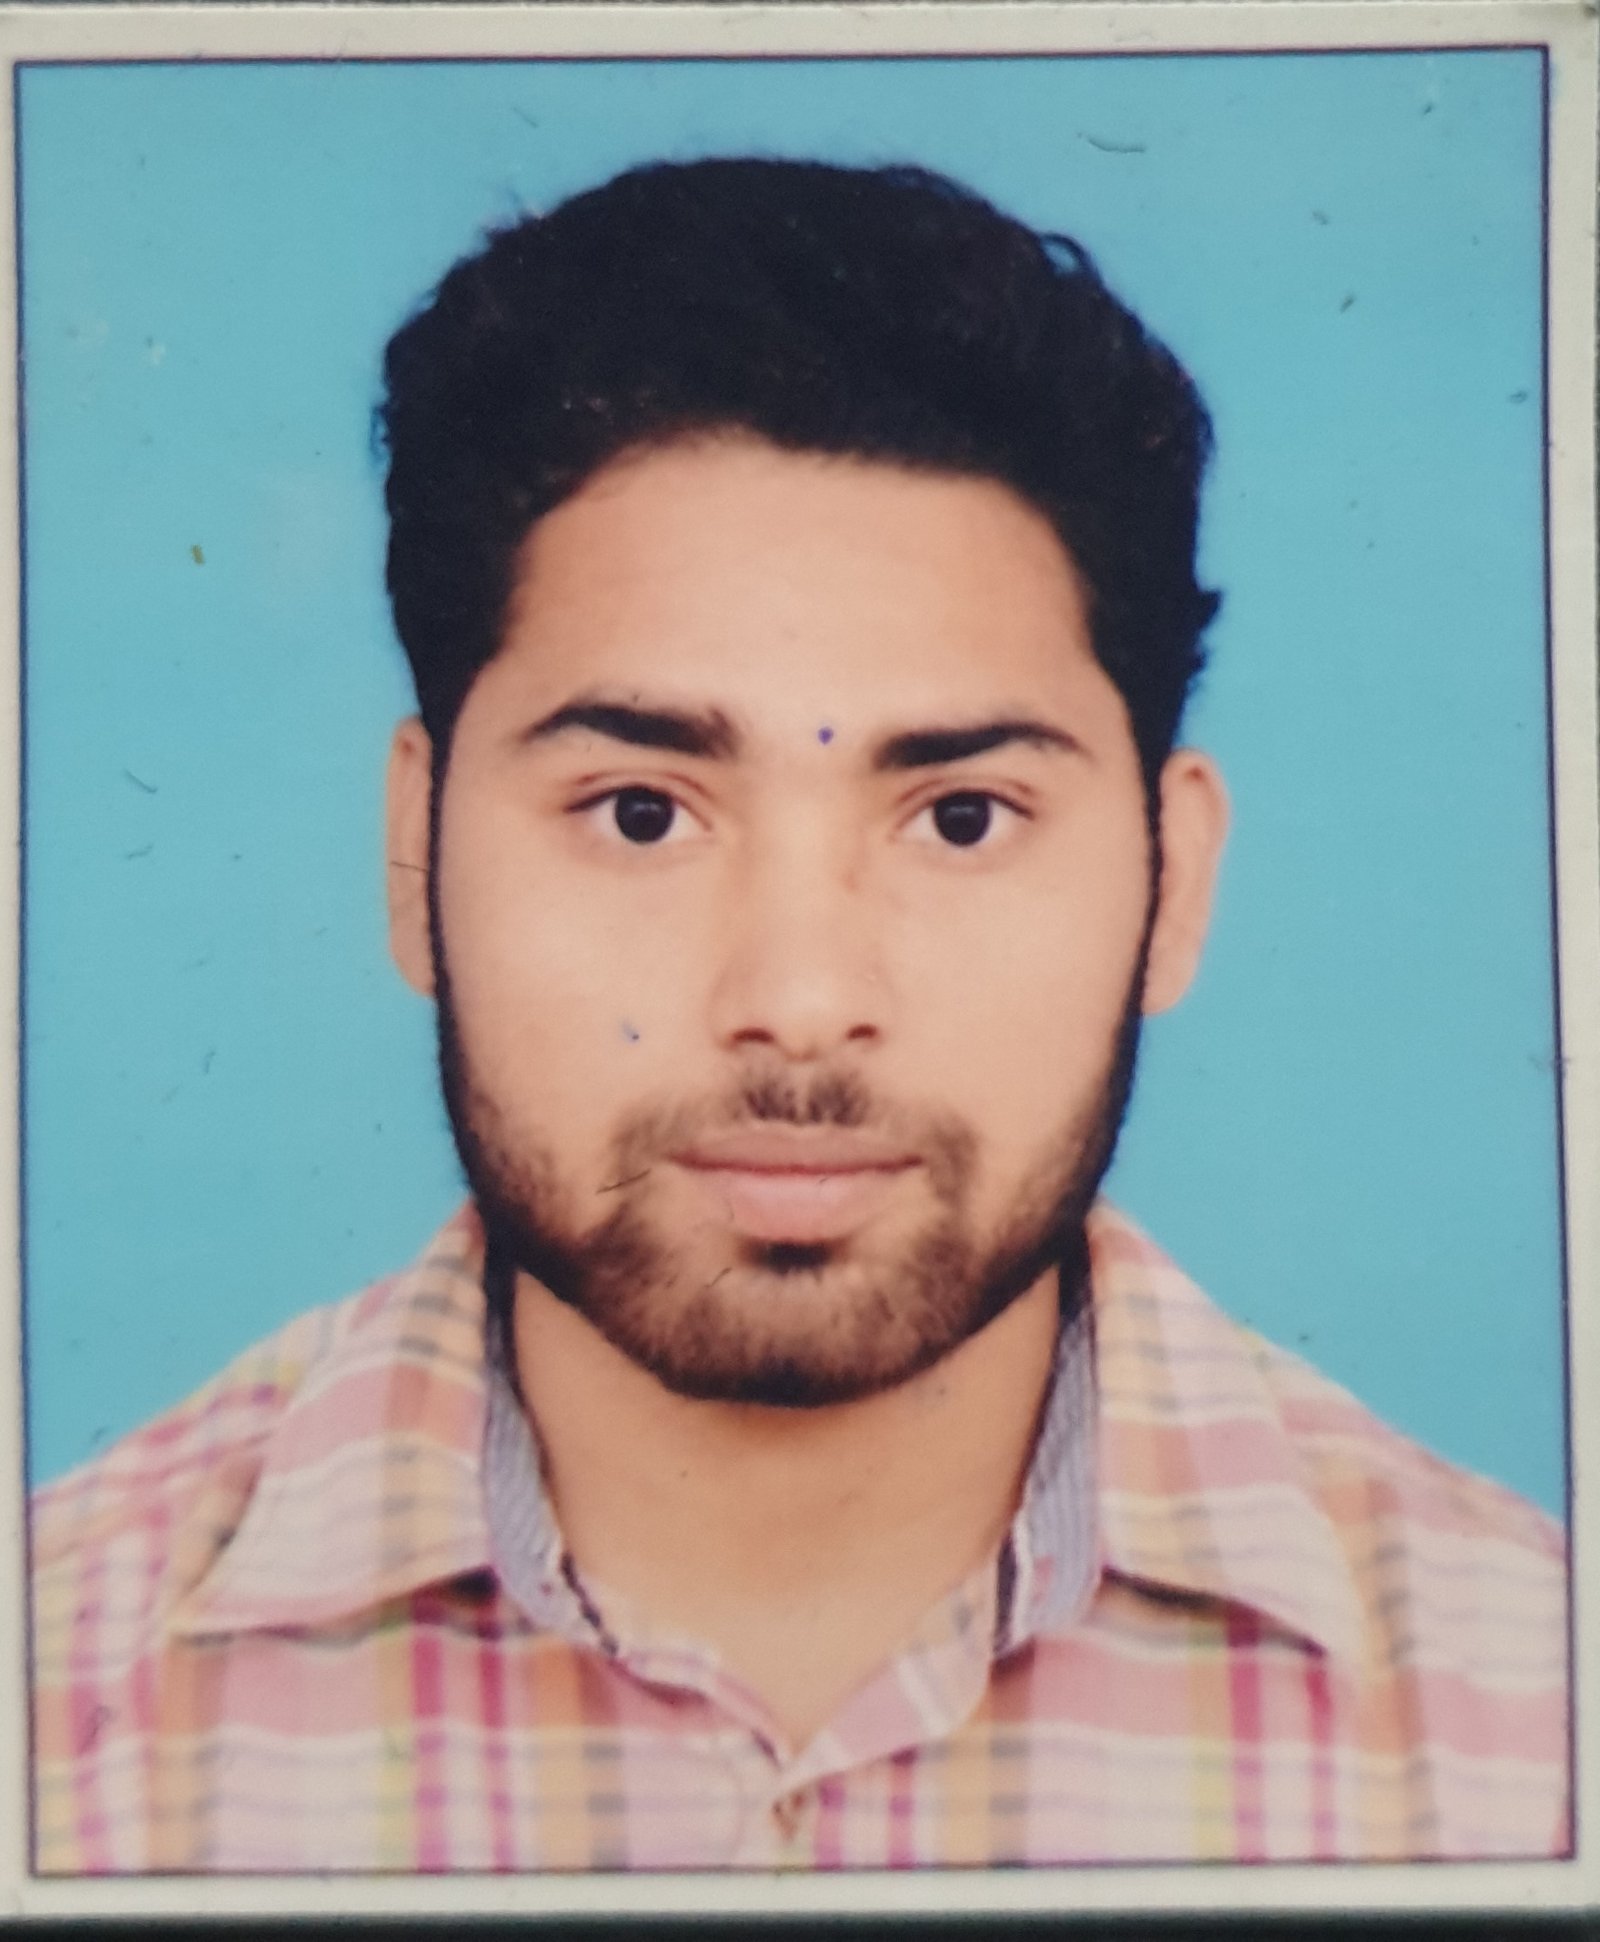 Placed candidate of 4Achievers - Ankit Chauhan